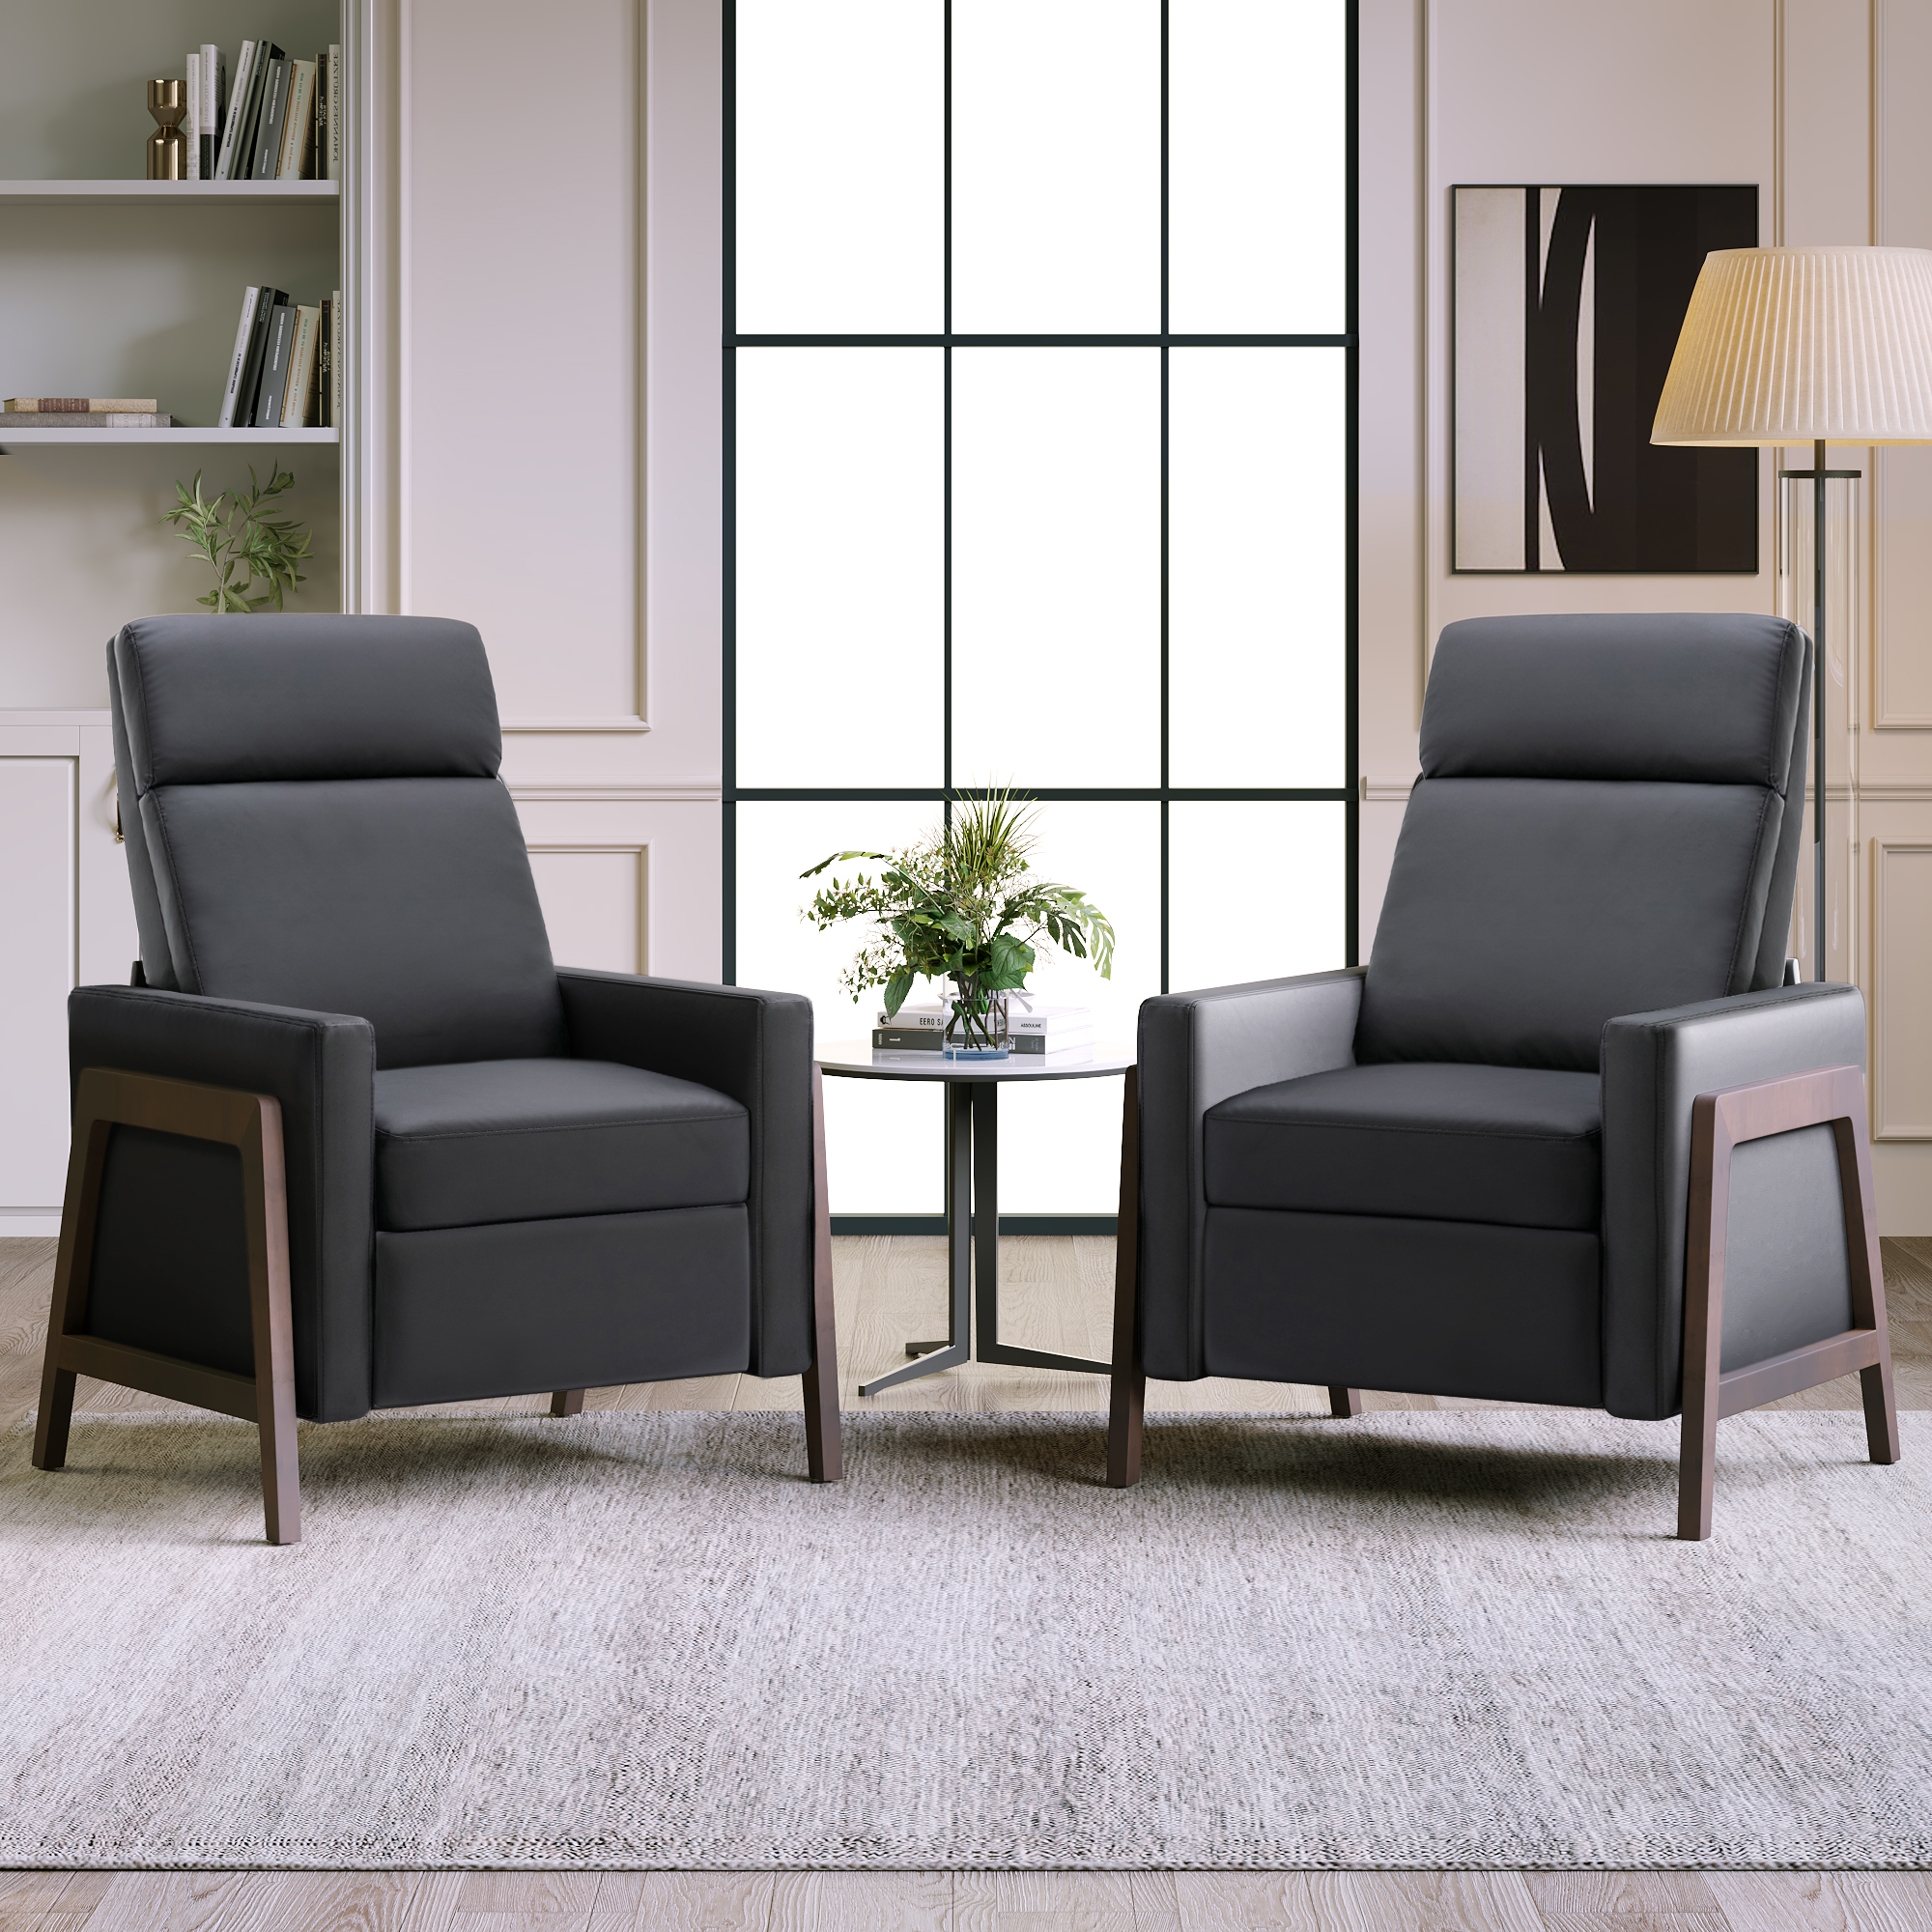 Wood-Framed PU Leather Recliner Chair, Set of Two - BS289527AAB